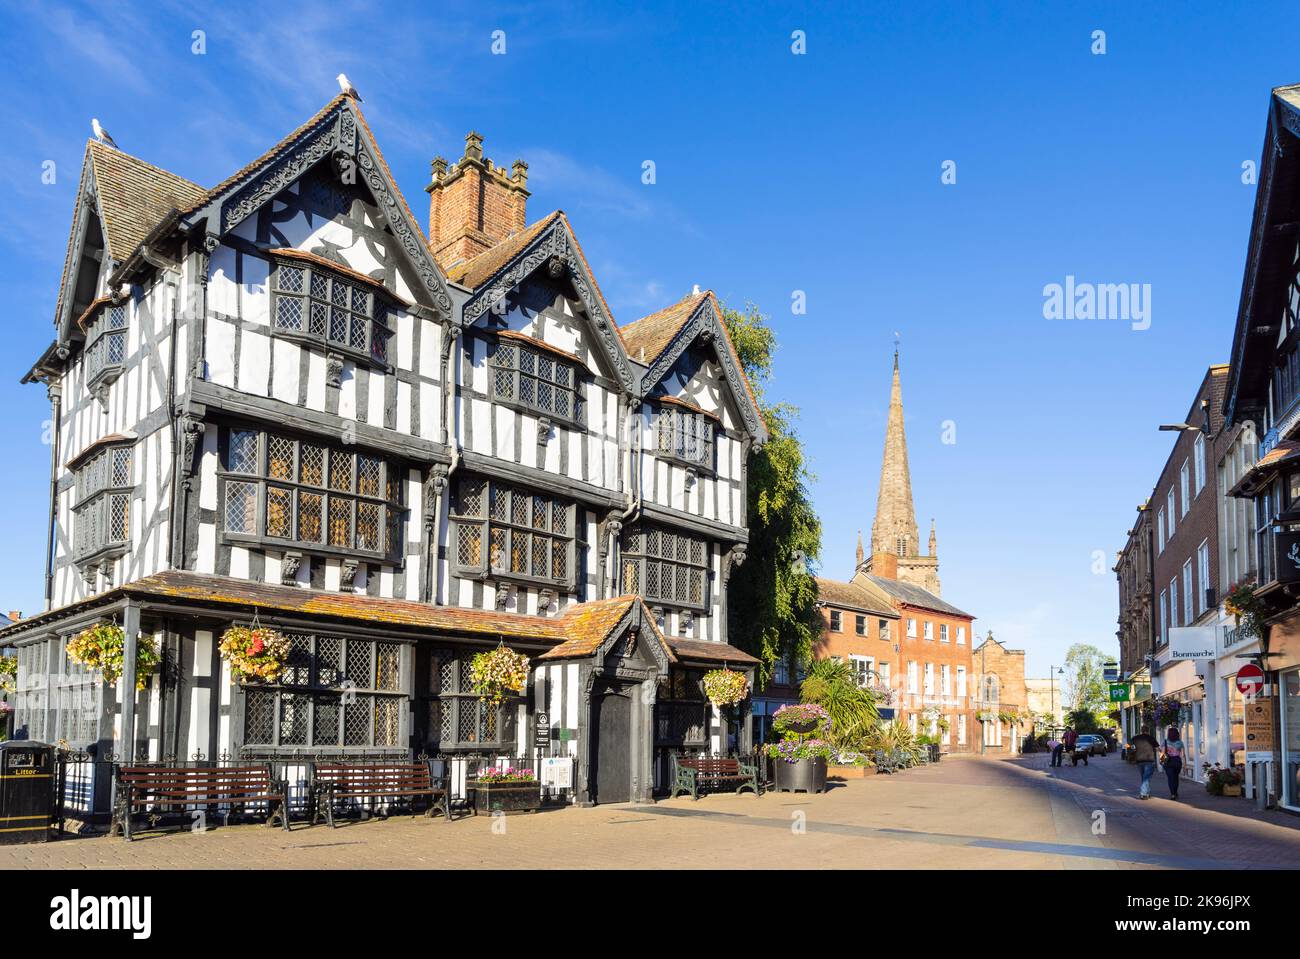 Hereford 17th Century The Old House Black and White House Museum St Peter's st and St Peter's Church spire High Town Hereford Herefordshire England UK Stock Photo